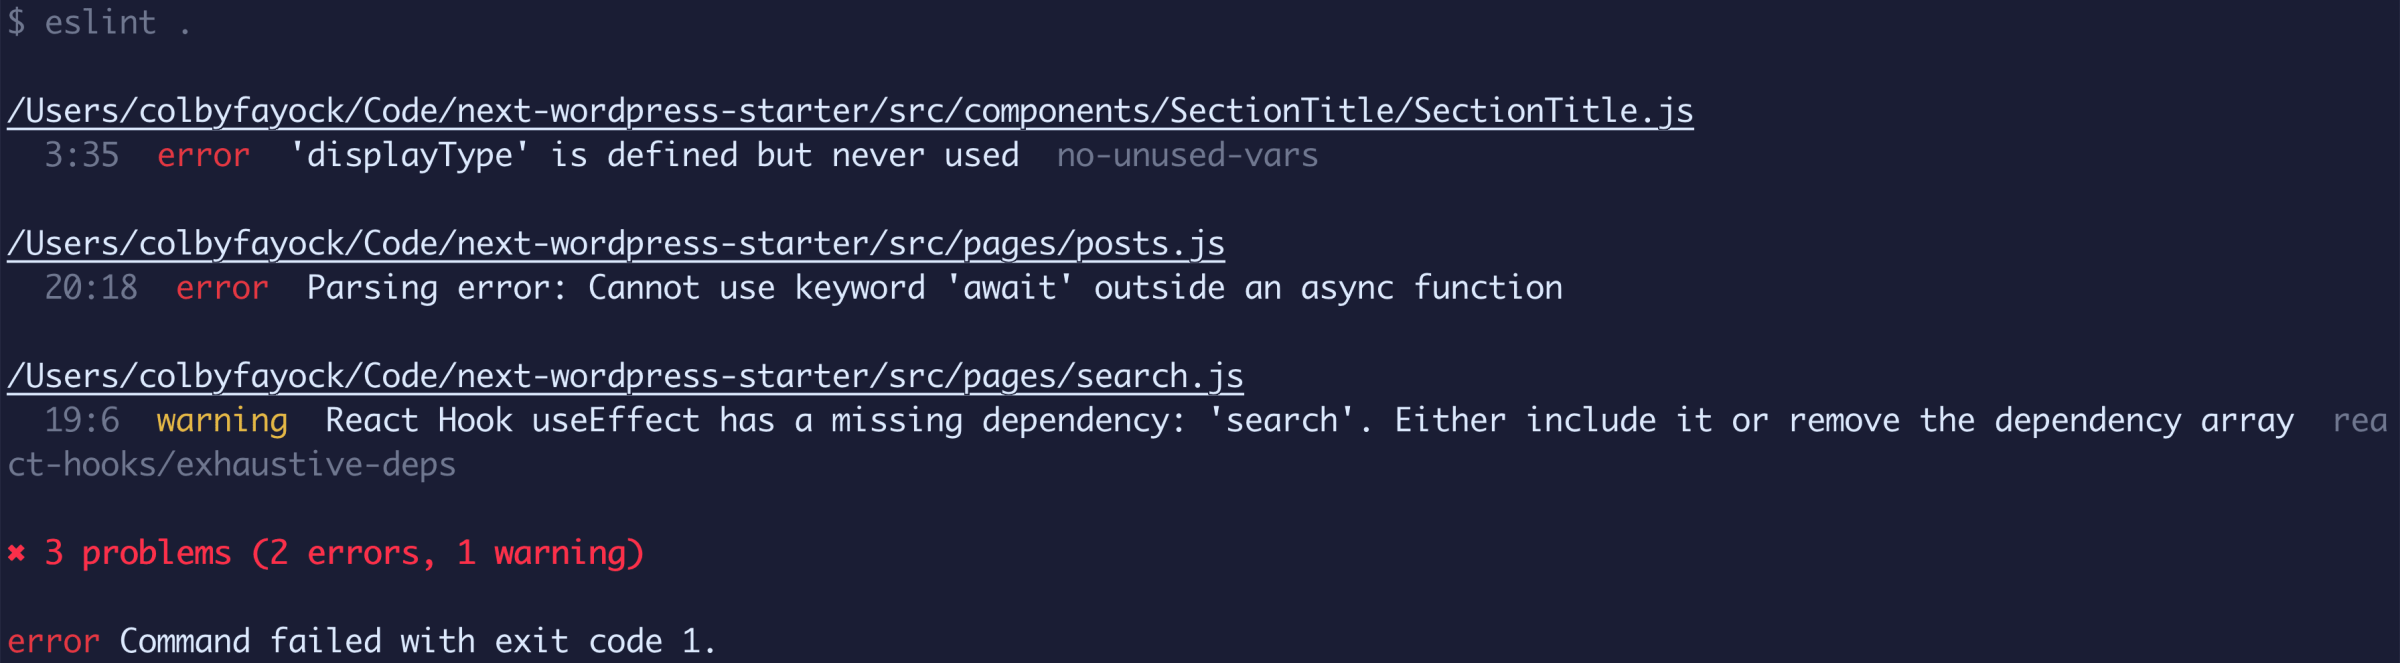 Screen with 2 errors, 1 warning. 1st error says DisplayType is defined but never used; 2nd is a Parsing error: Cannot use keyword 'await' outside an async function; 3rd is a warning that React Hook useEffect has a missing dependency: 'search’